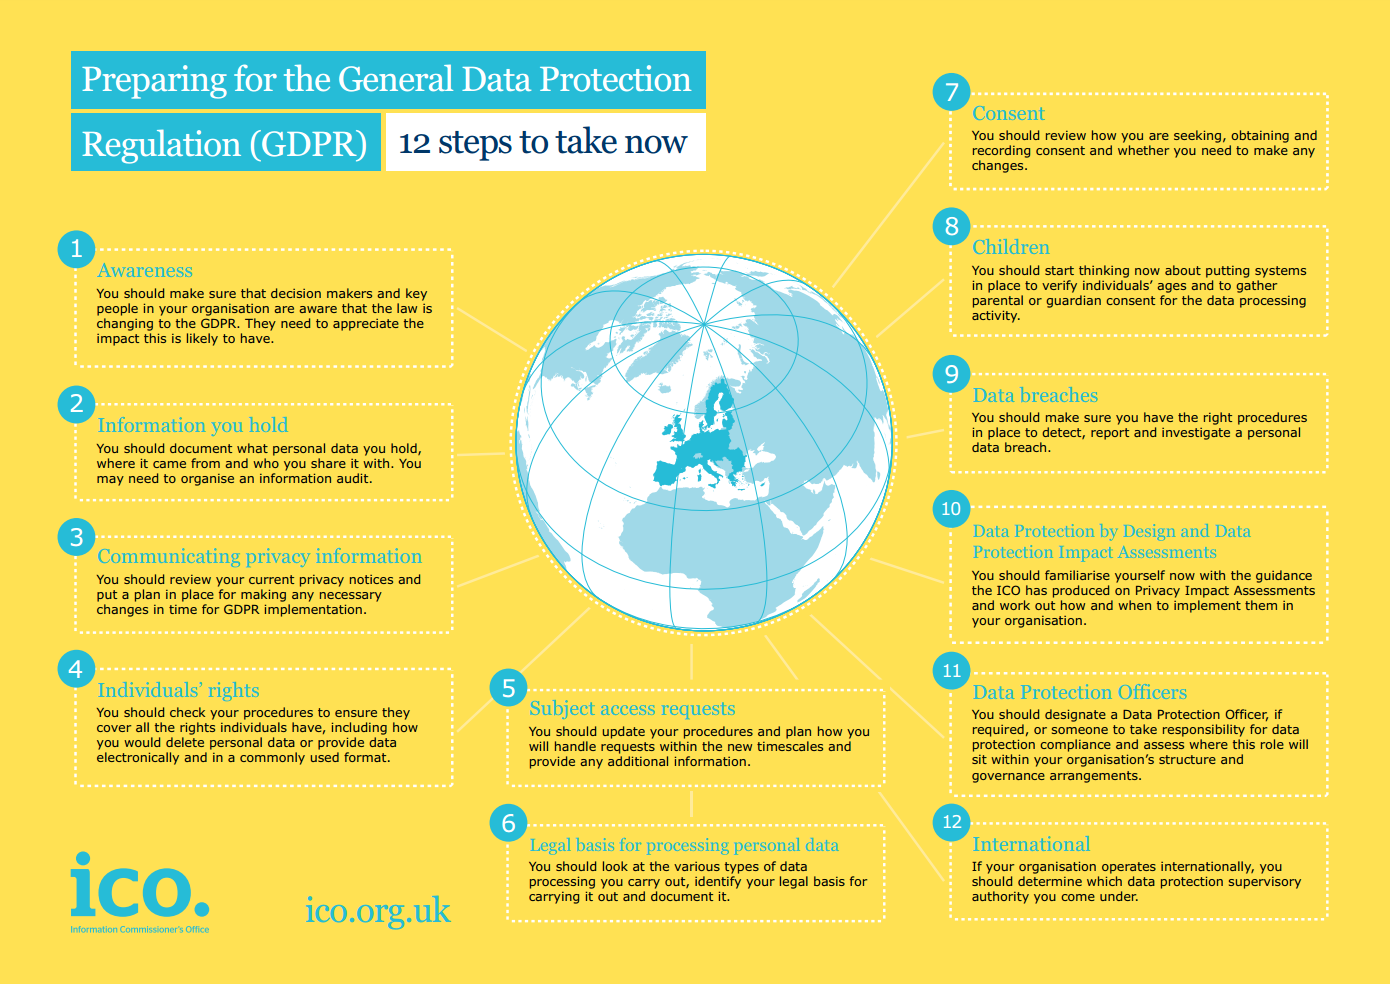 Are you ready for data protection reform?